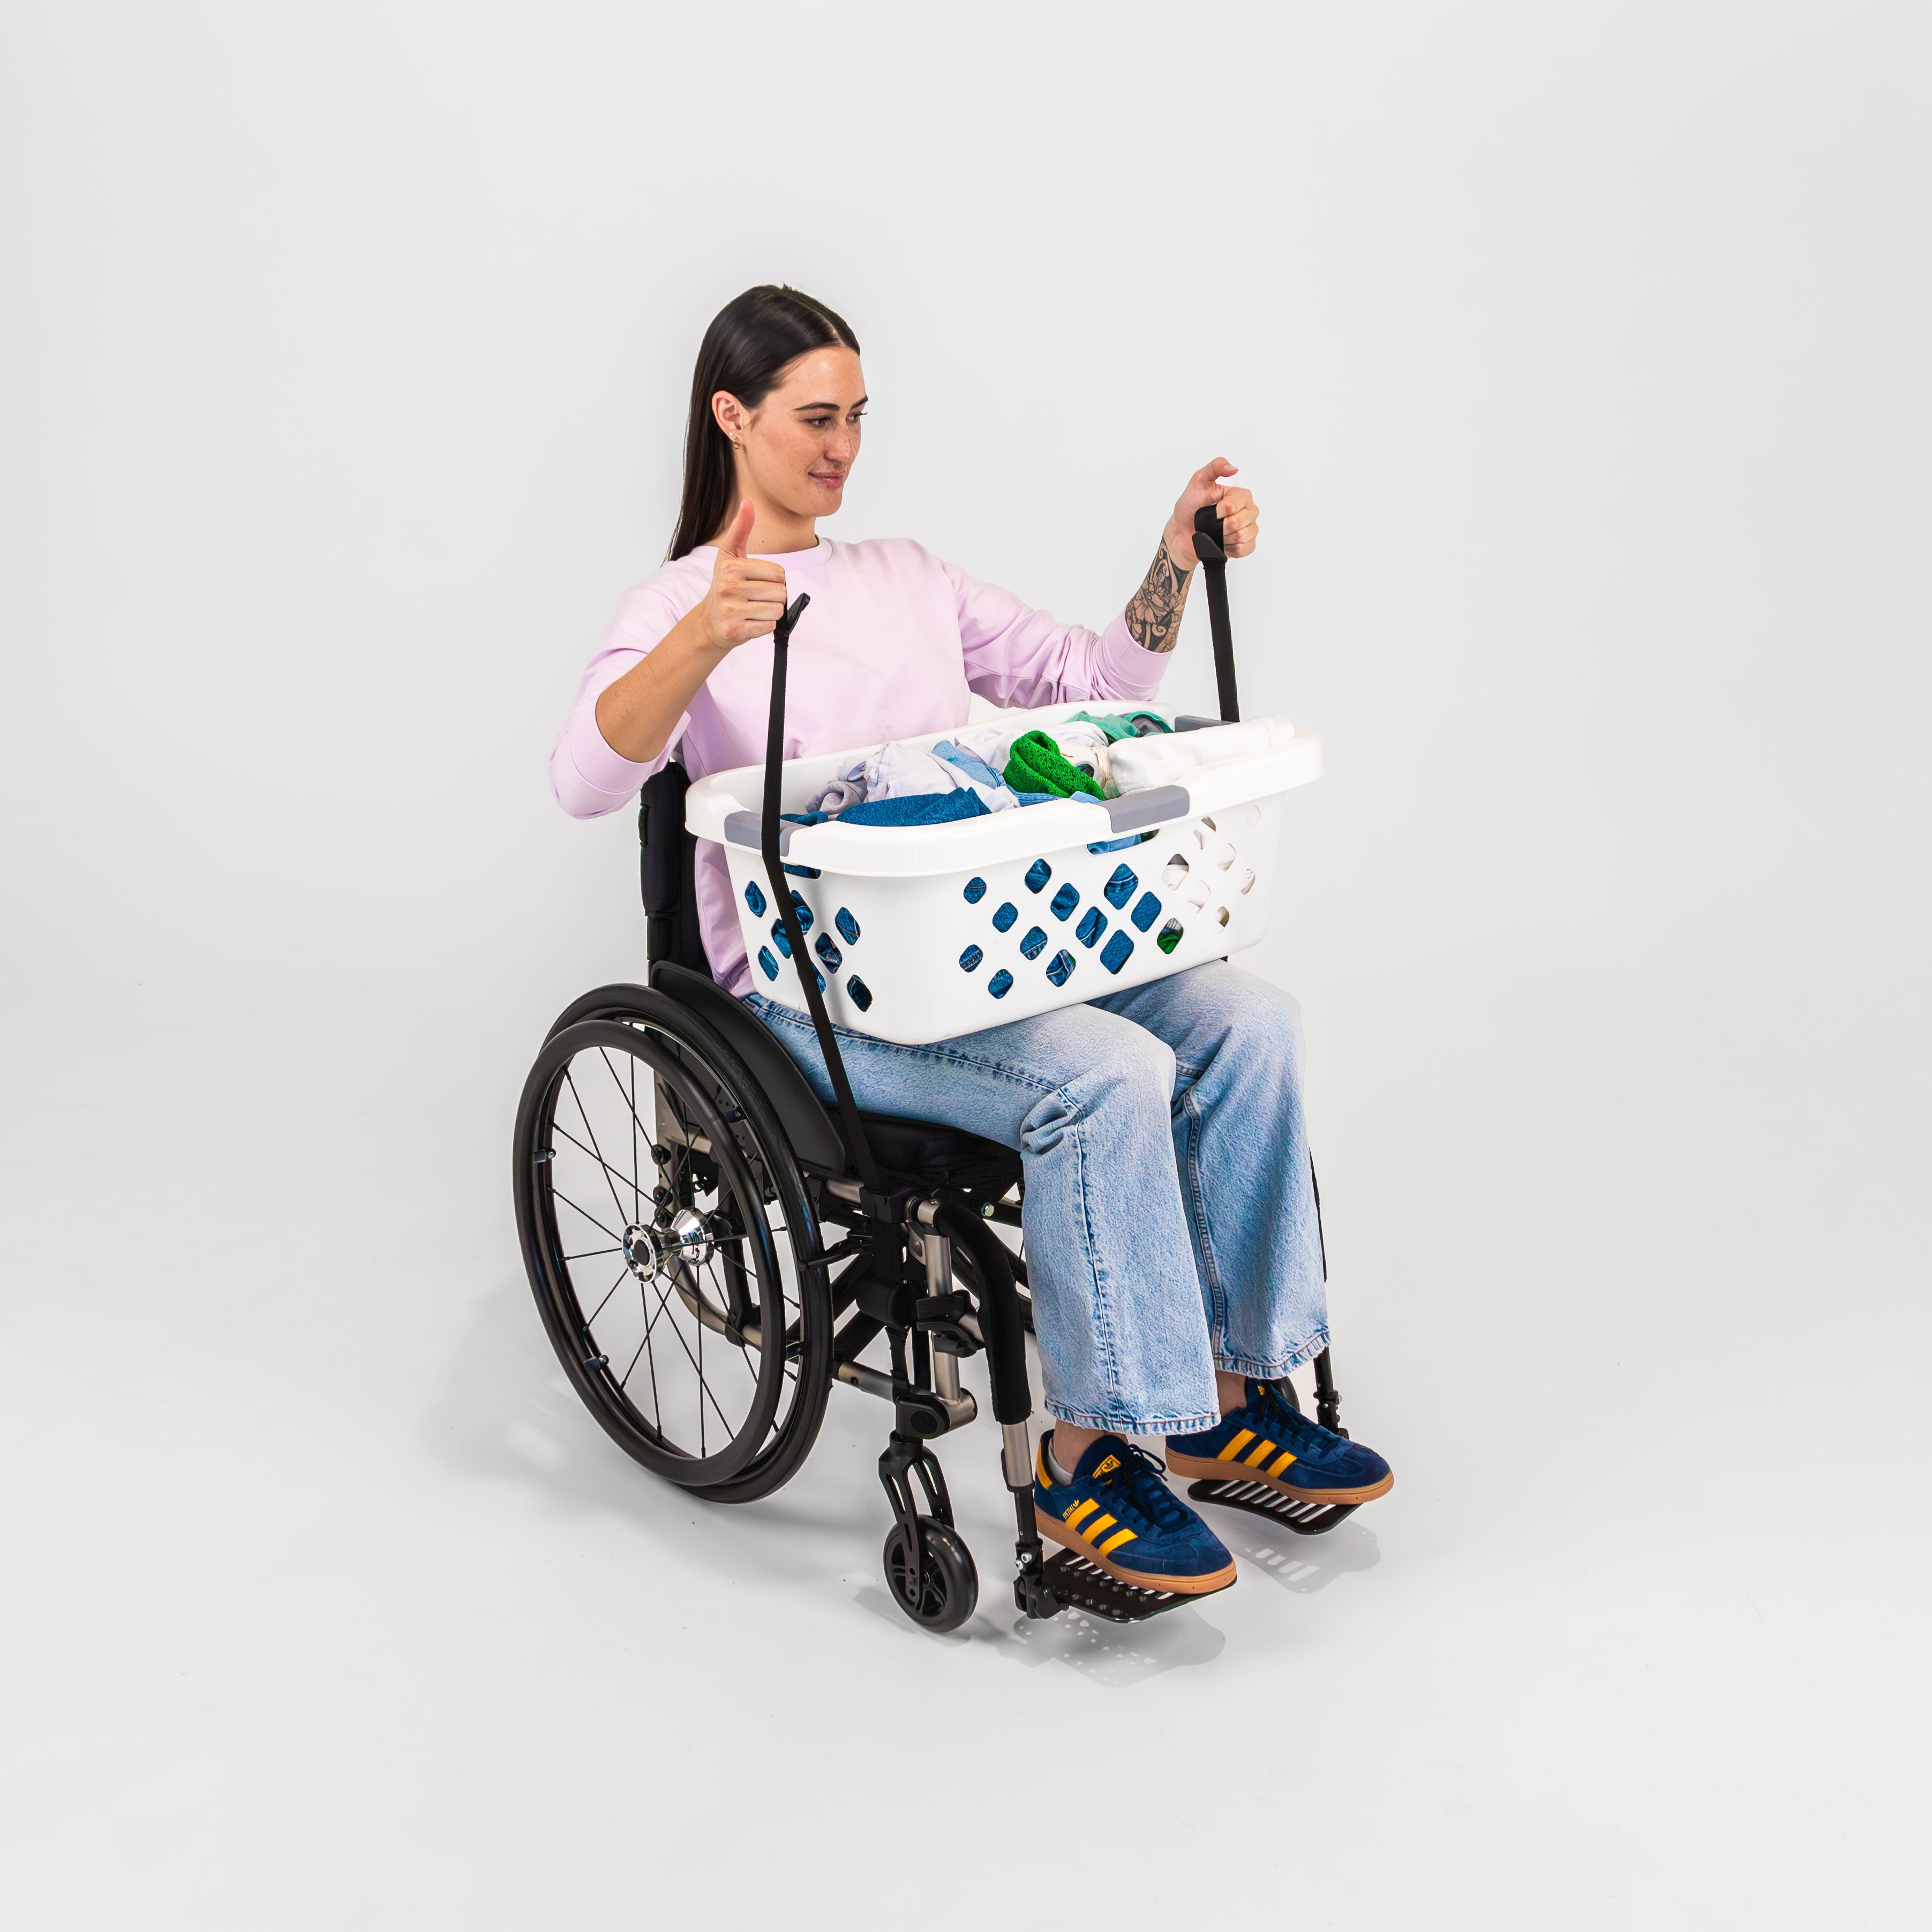 Smiling women with pink t-shirt seated in a wheelchair pulling straps up over a washing basket to her lap using LapStacker Flex.